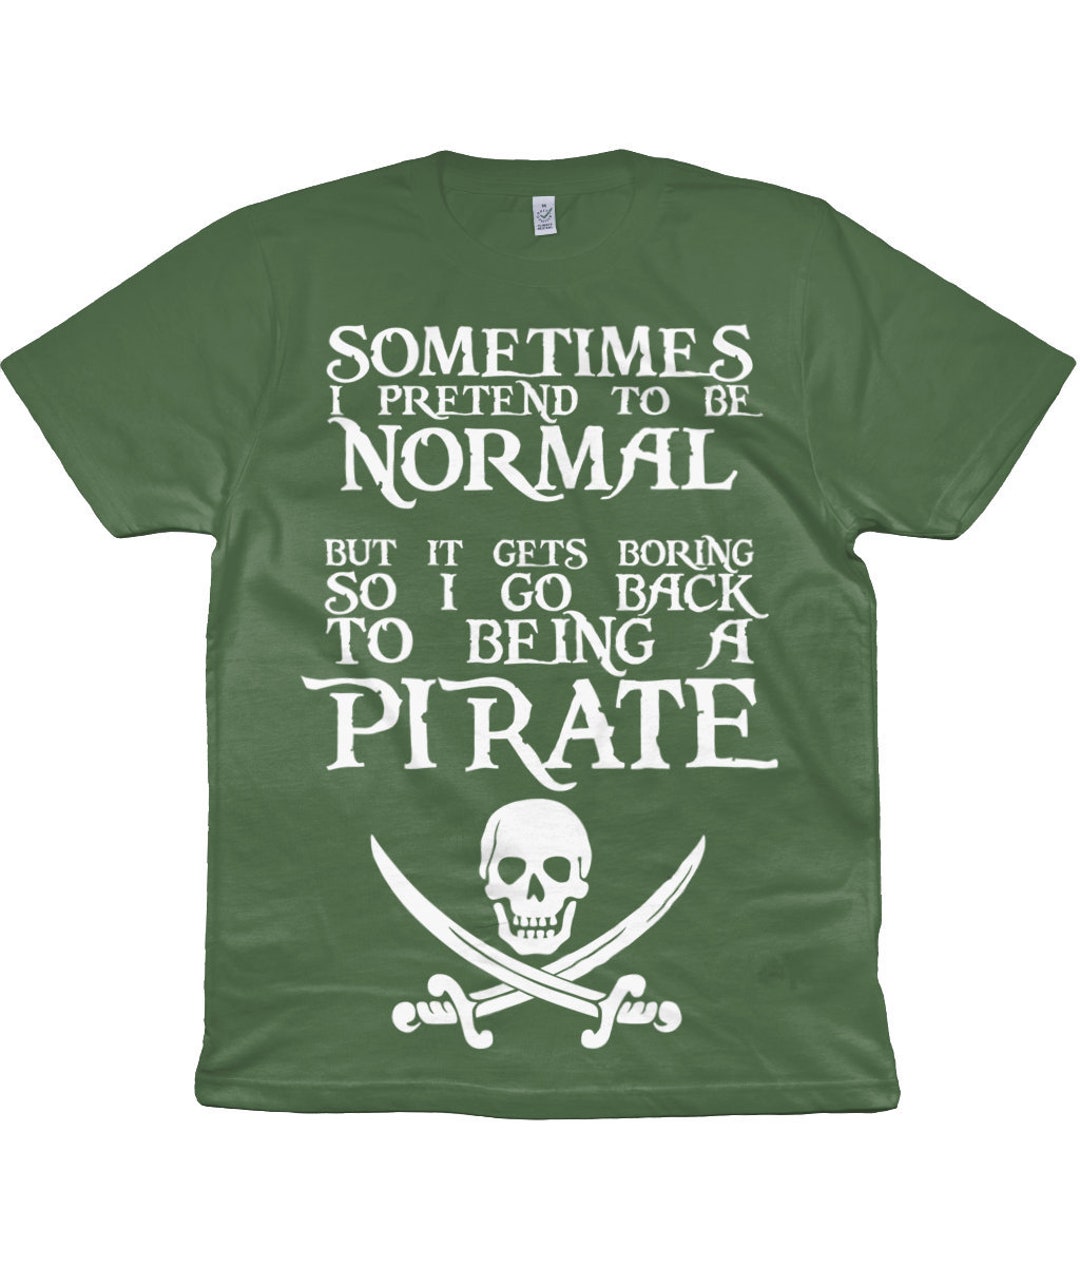 Pirate T-shirt Organic Eco Friendly Ethical Sustainable - Etsy